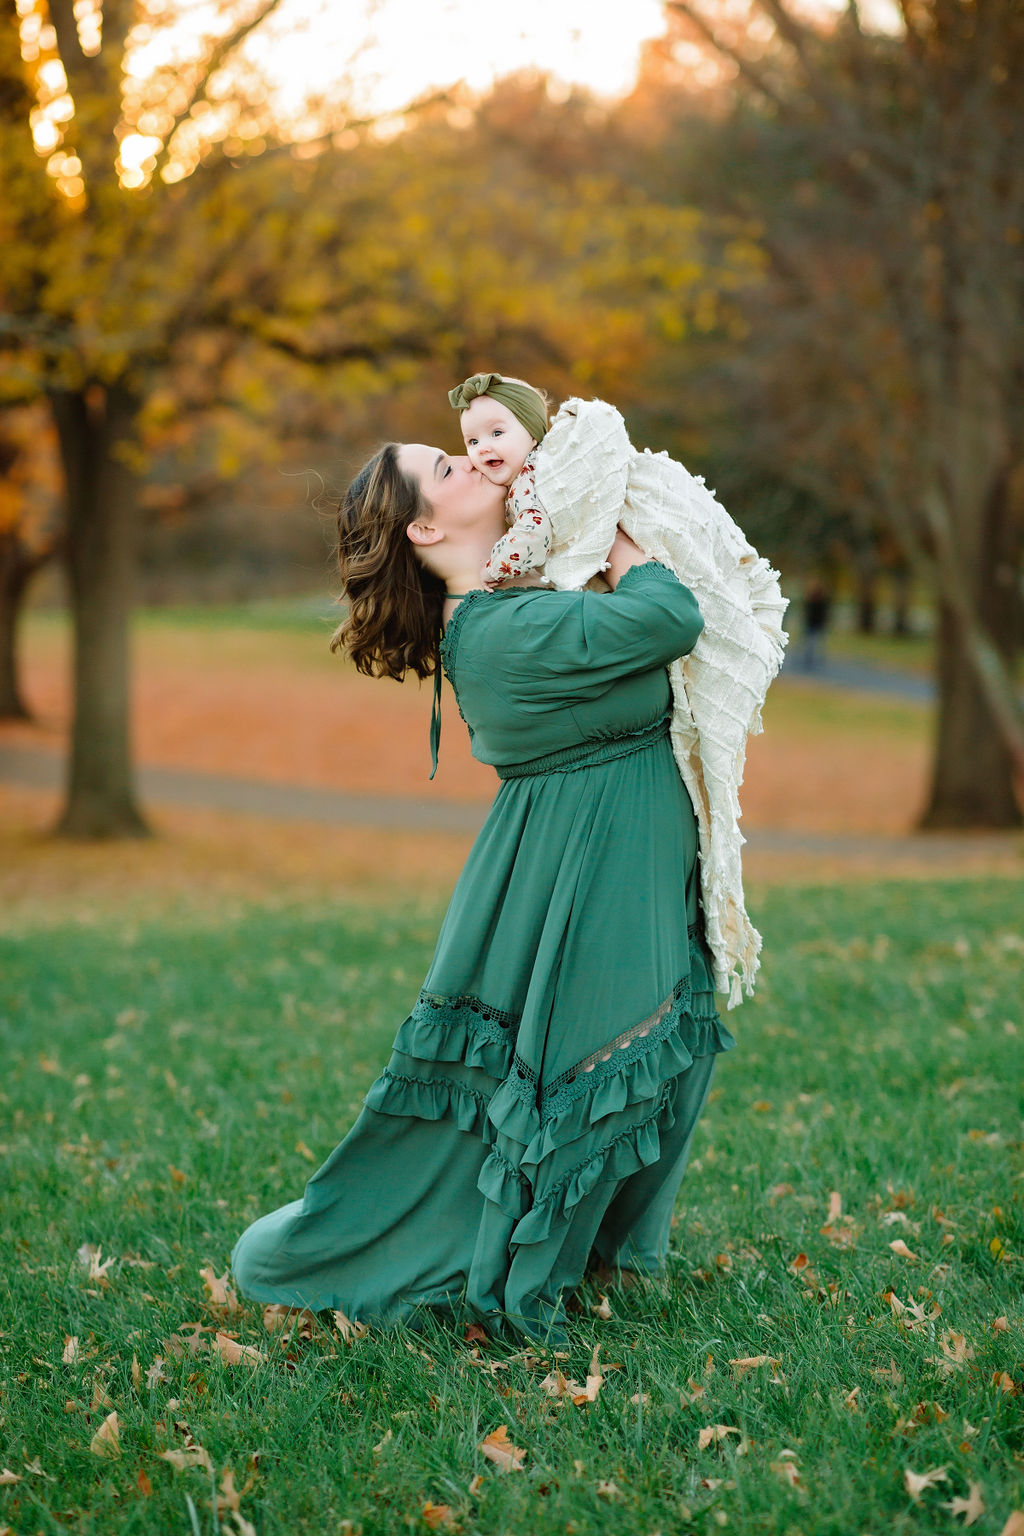 A new mom lifts and plays with her infant daughter while wearing a long green dress in a field at sunset